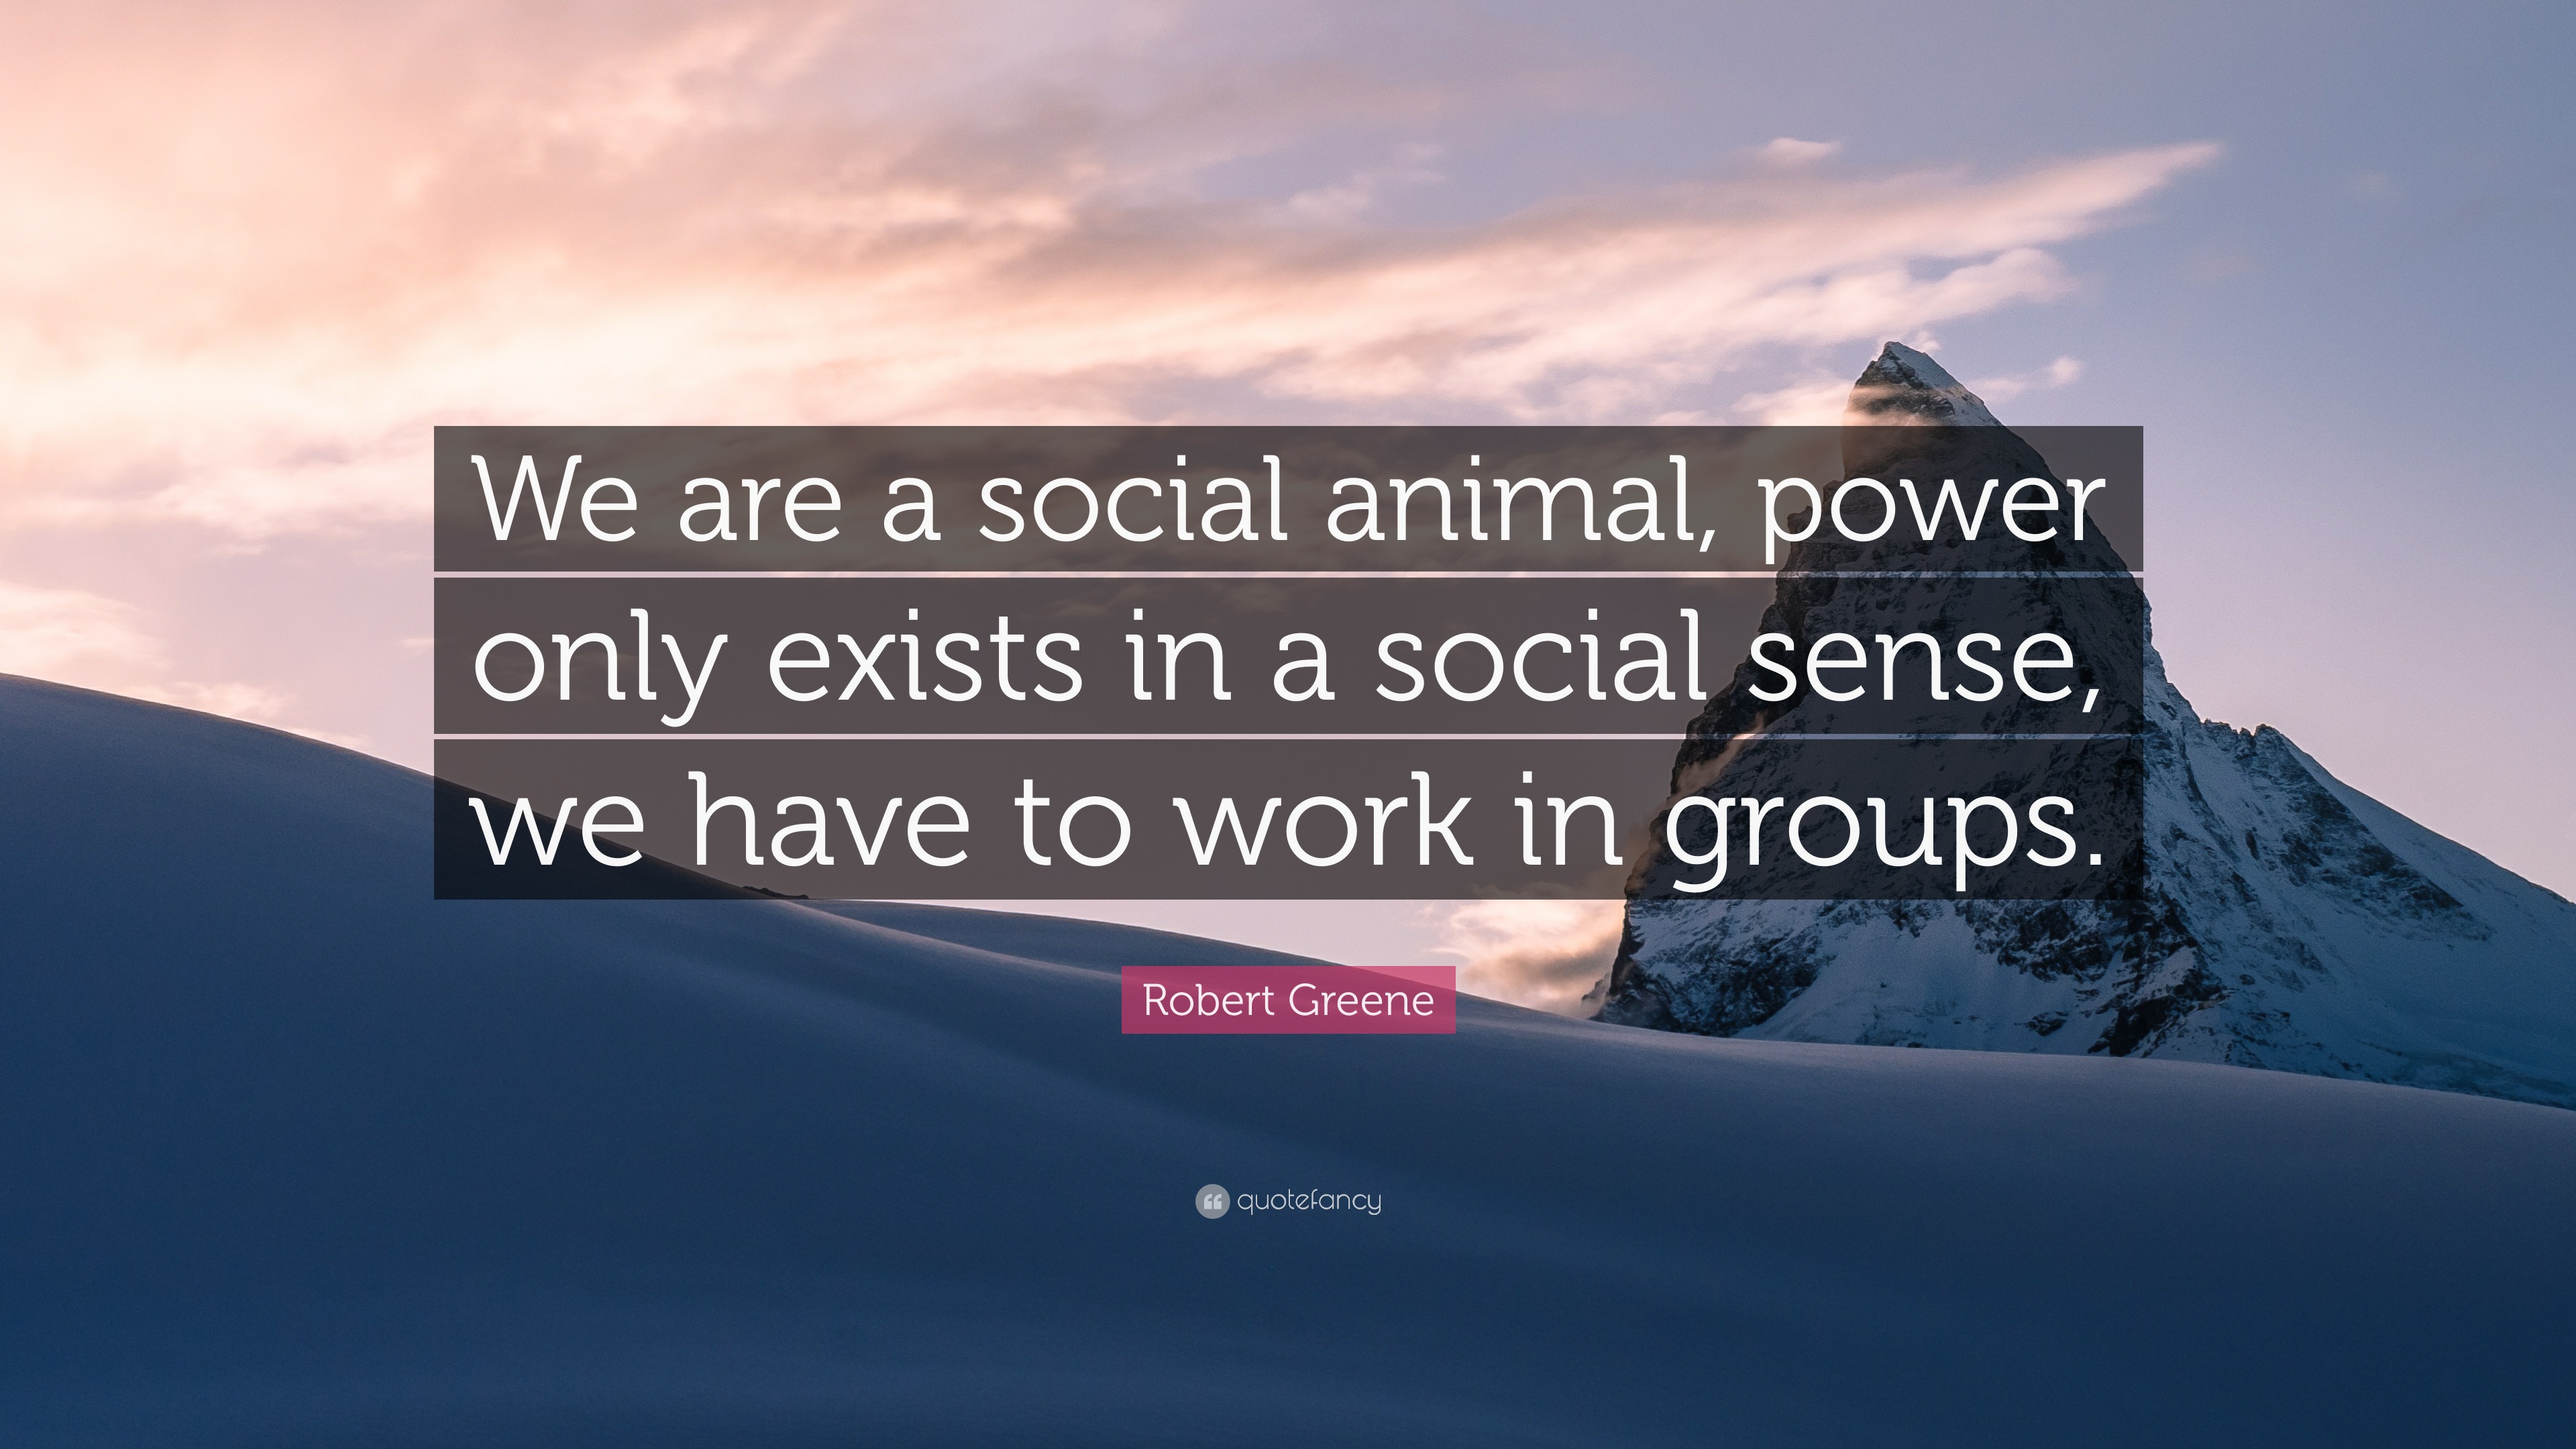 Robert Greene Quote: “We are a social animal, power only exists in a social  sense, we